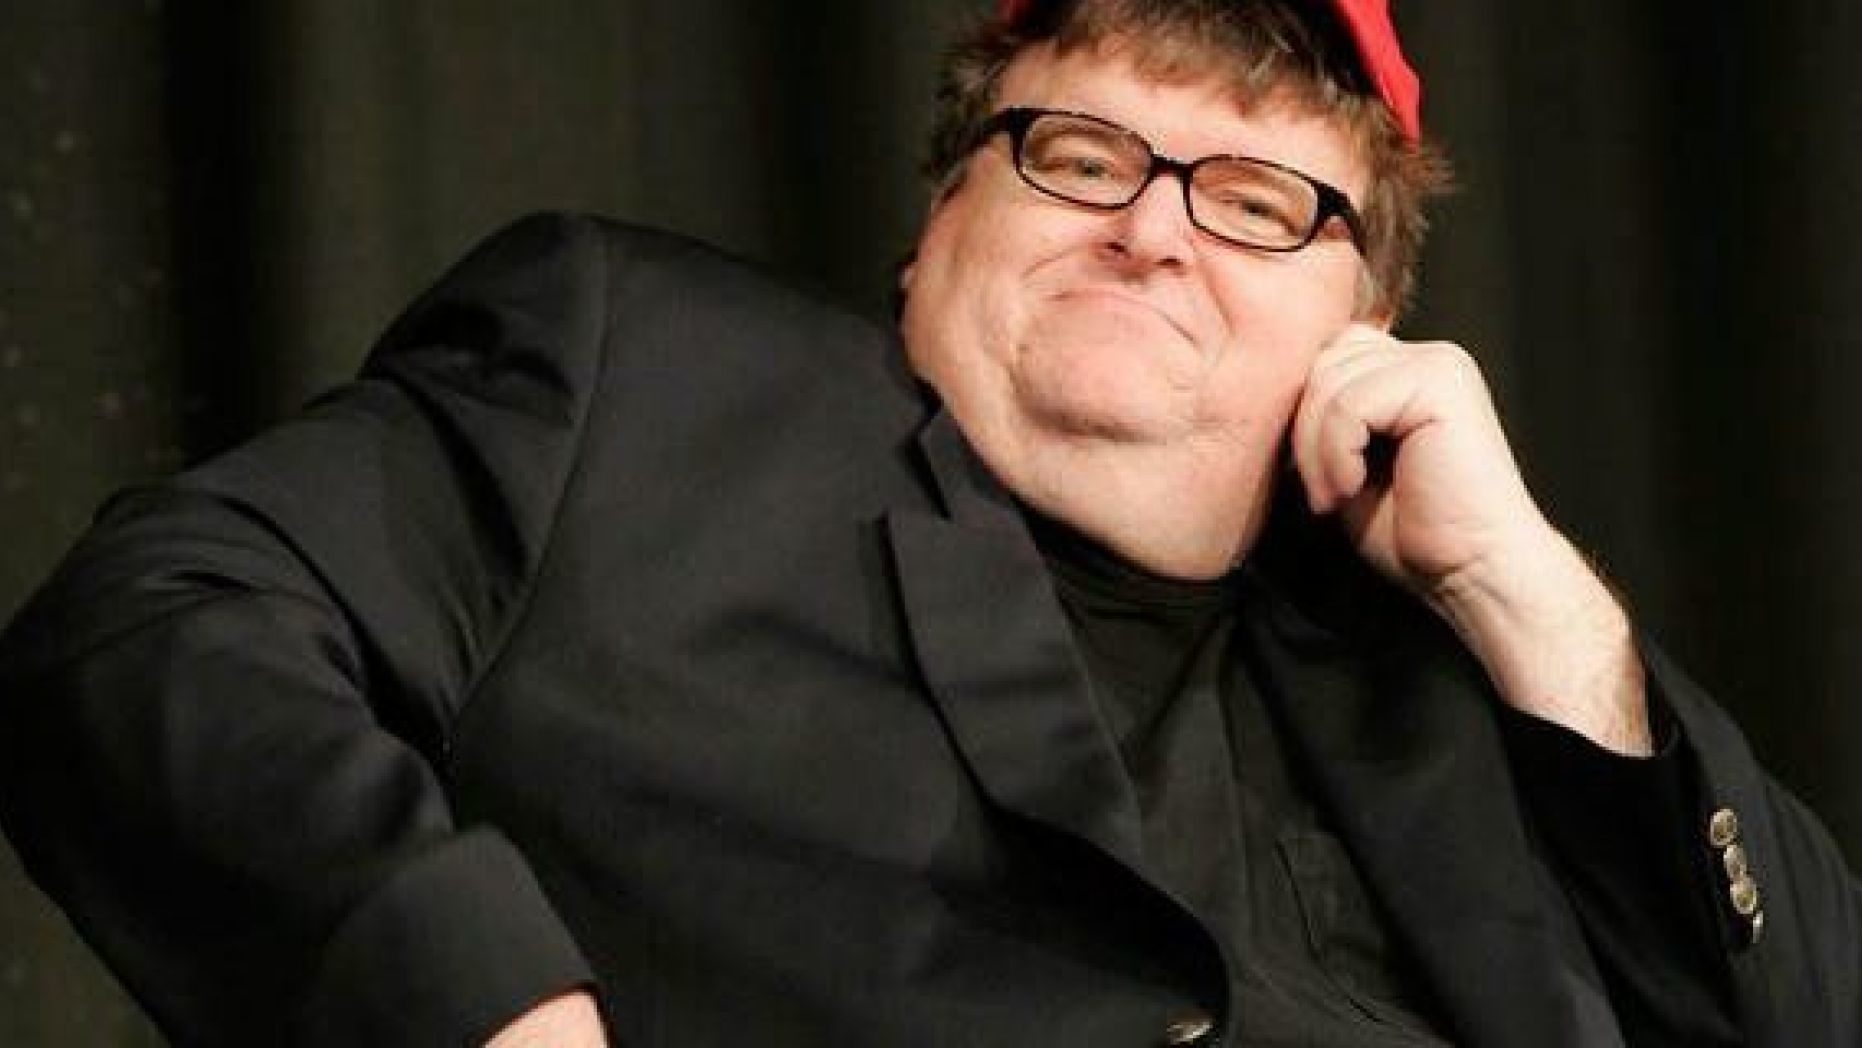 Michael Moore said he is “frightened for the country” during an appearance on MSNBC.